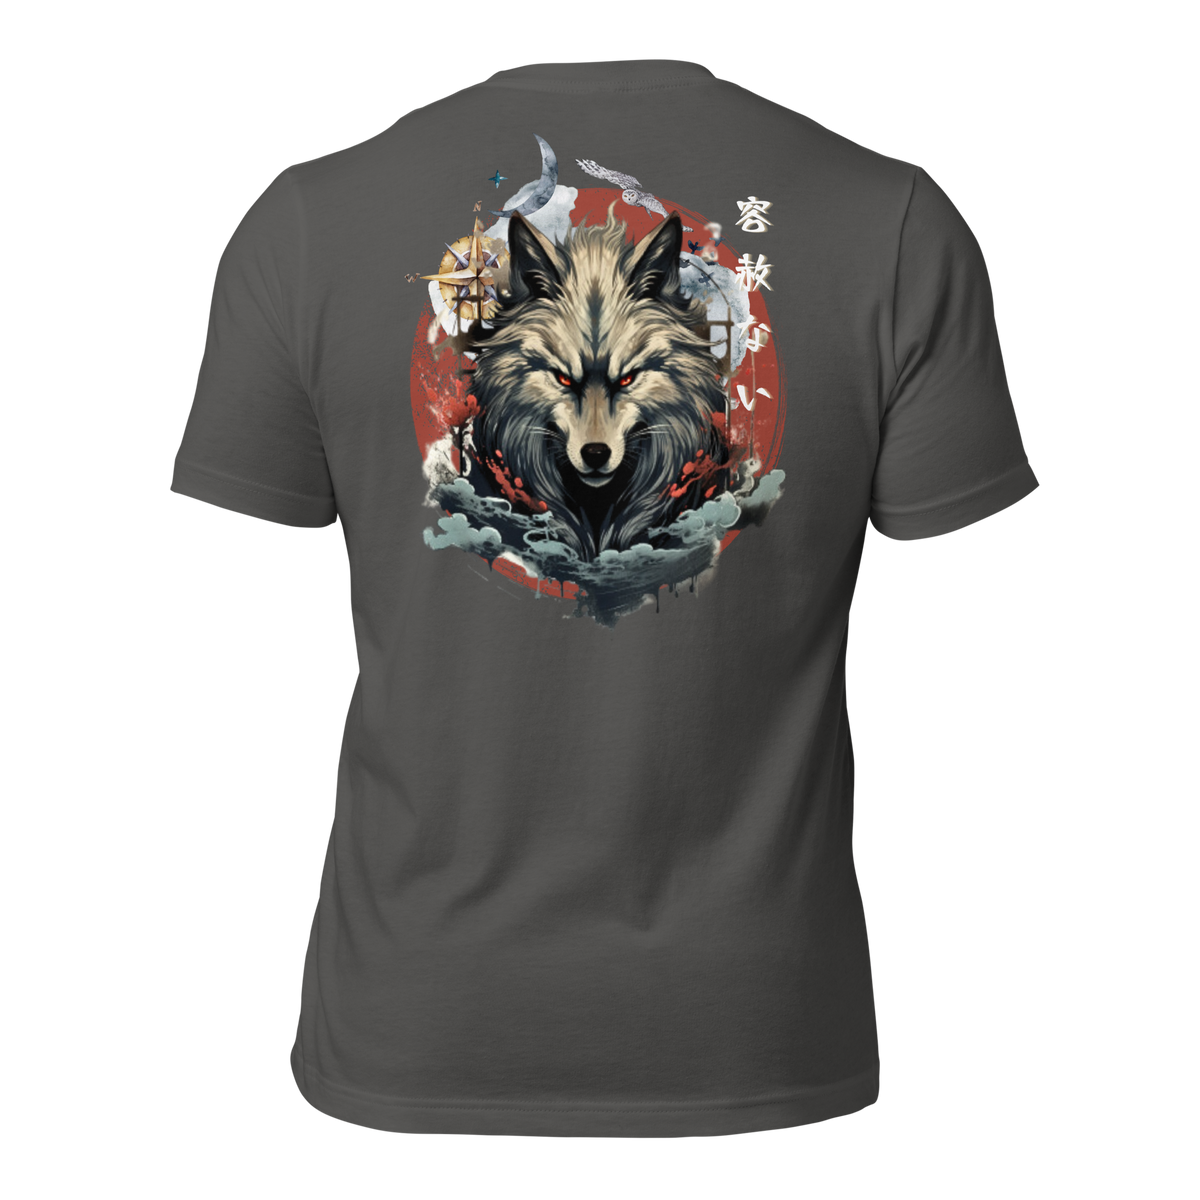 Asphalt- Japanese Wolf T-Shirt, Cultural Fashion, Folklore Inspired, Nature Motif, Compass Design, Symbolic Apparel, Mythical Creatures, Artistic Tee, Intricate Prints, Storytelling Fashion, Traditional Art, Adventure Ready, Unique Graphic, Heritage Style, Compass Rose, Mystical Symbolism, Wolf Spirit. Navigational Theme, Cultural Fusion, Statement Wear, gif for him, gift for dad